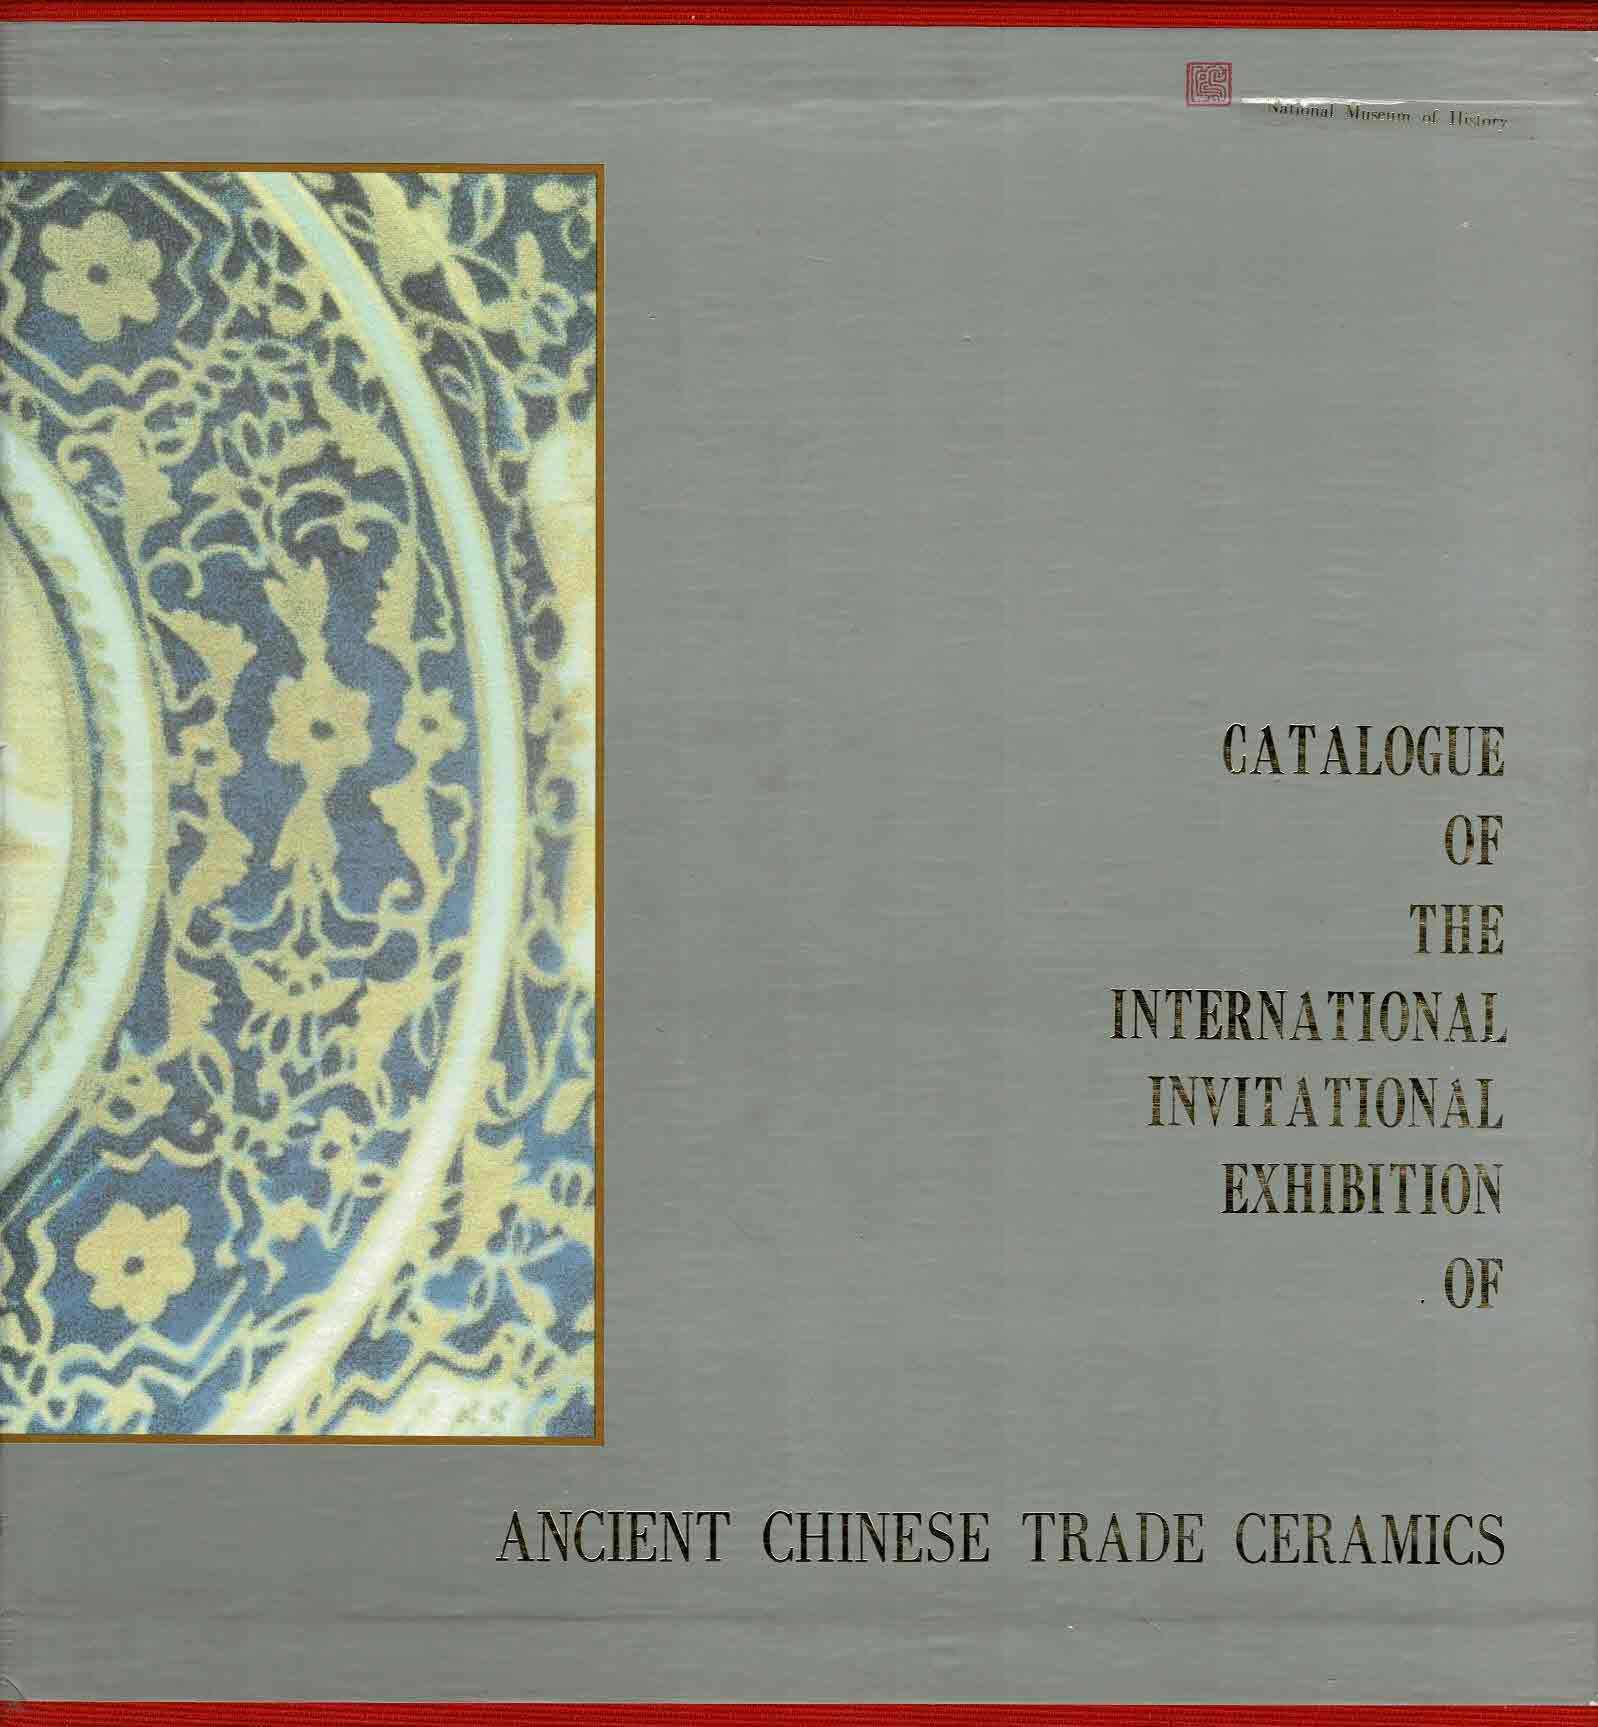 National Museum of History - Catalogue of the International Invitational Exhibition of Ancient Chinese Trade Ceramics (2 Volumes)